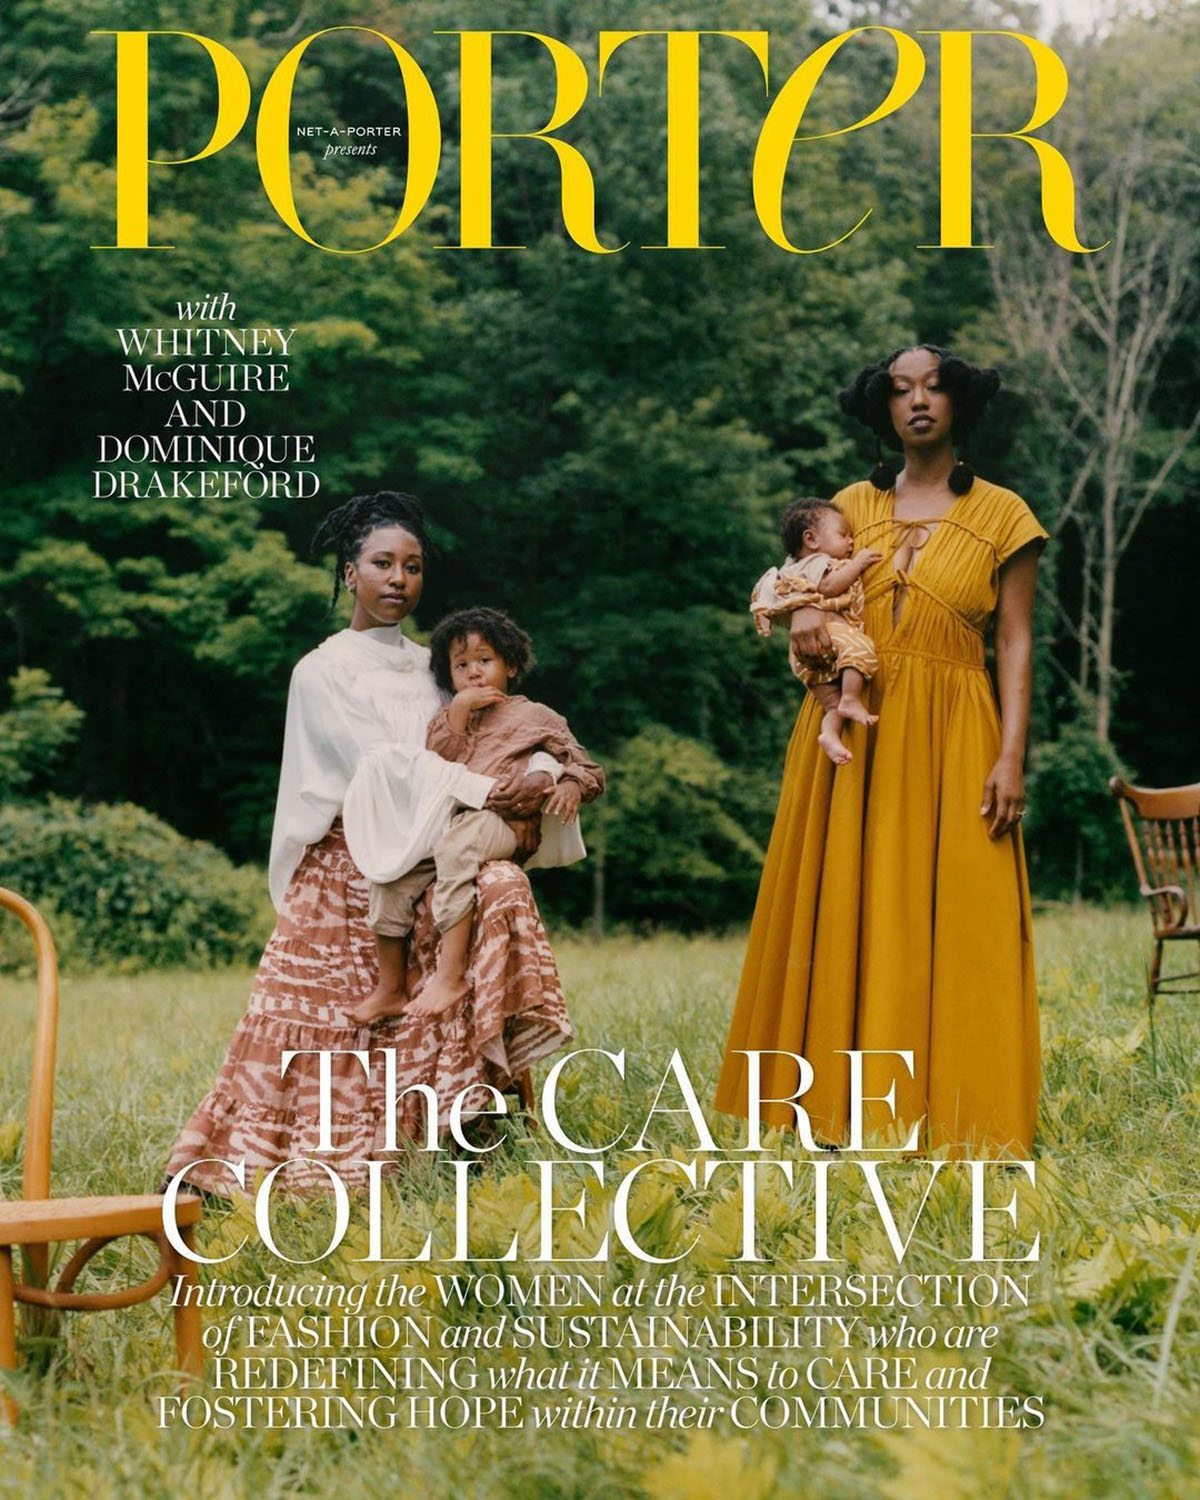 Porter Magazine August 23rd, 2021 covers by Camila Falquez